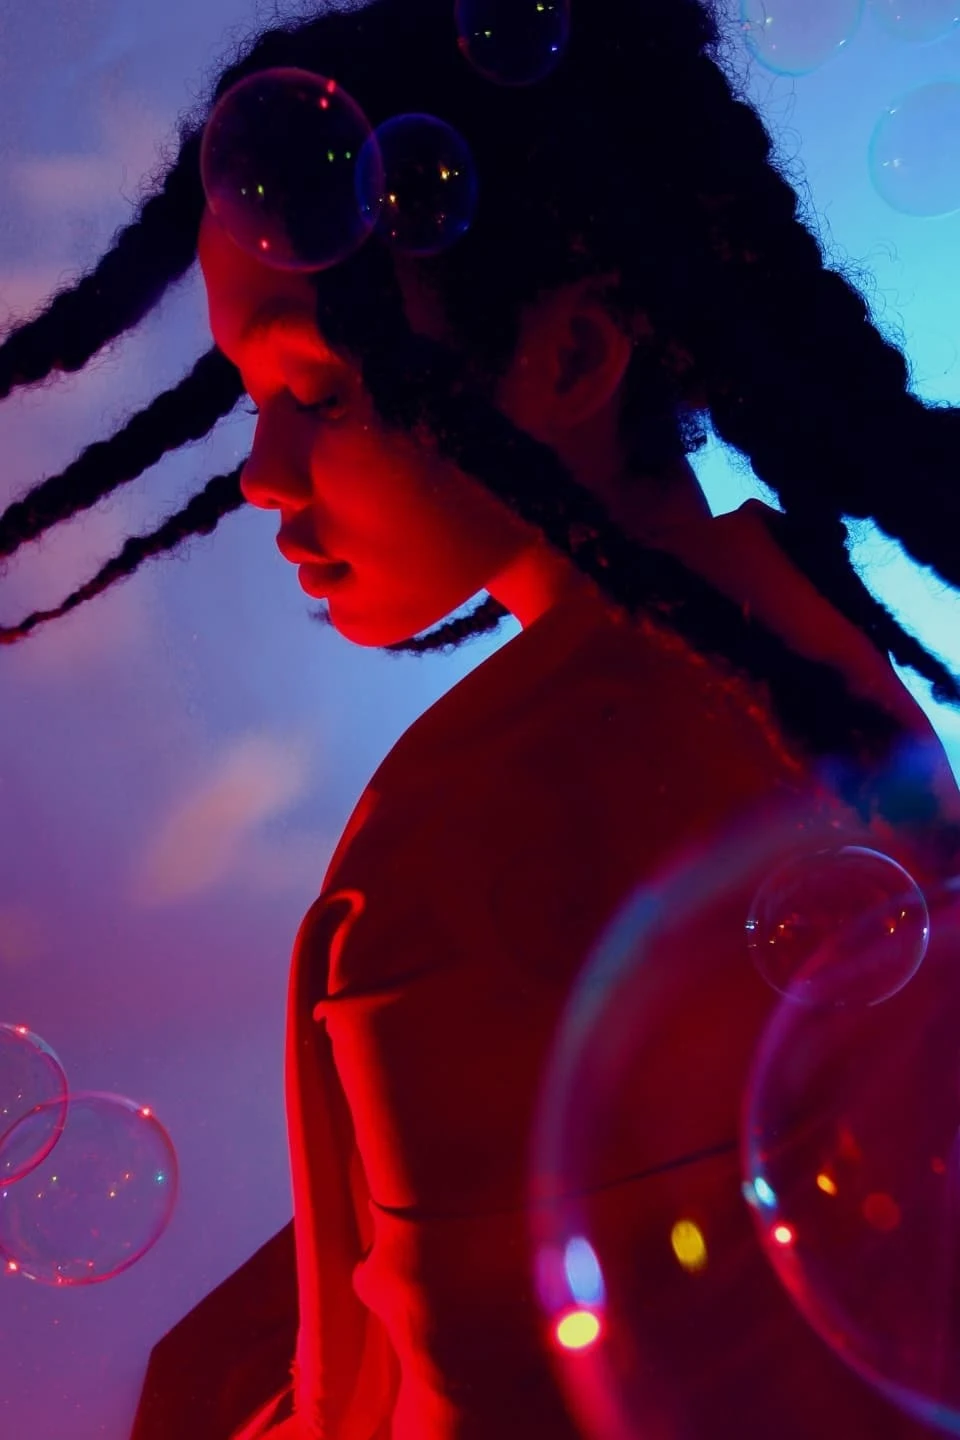 A teenage girl with long braids dancing in blue and purple mood lighting as bubbles float around her